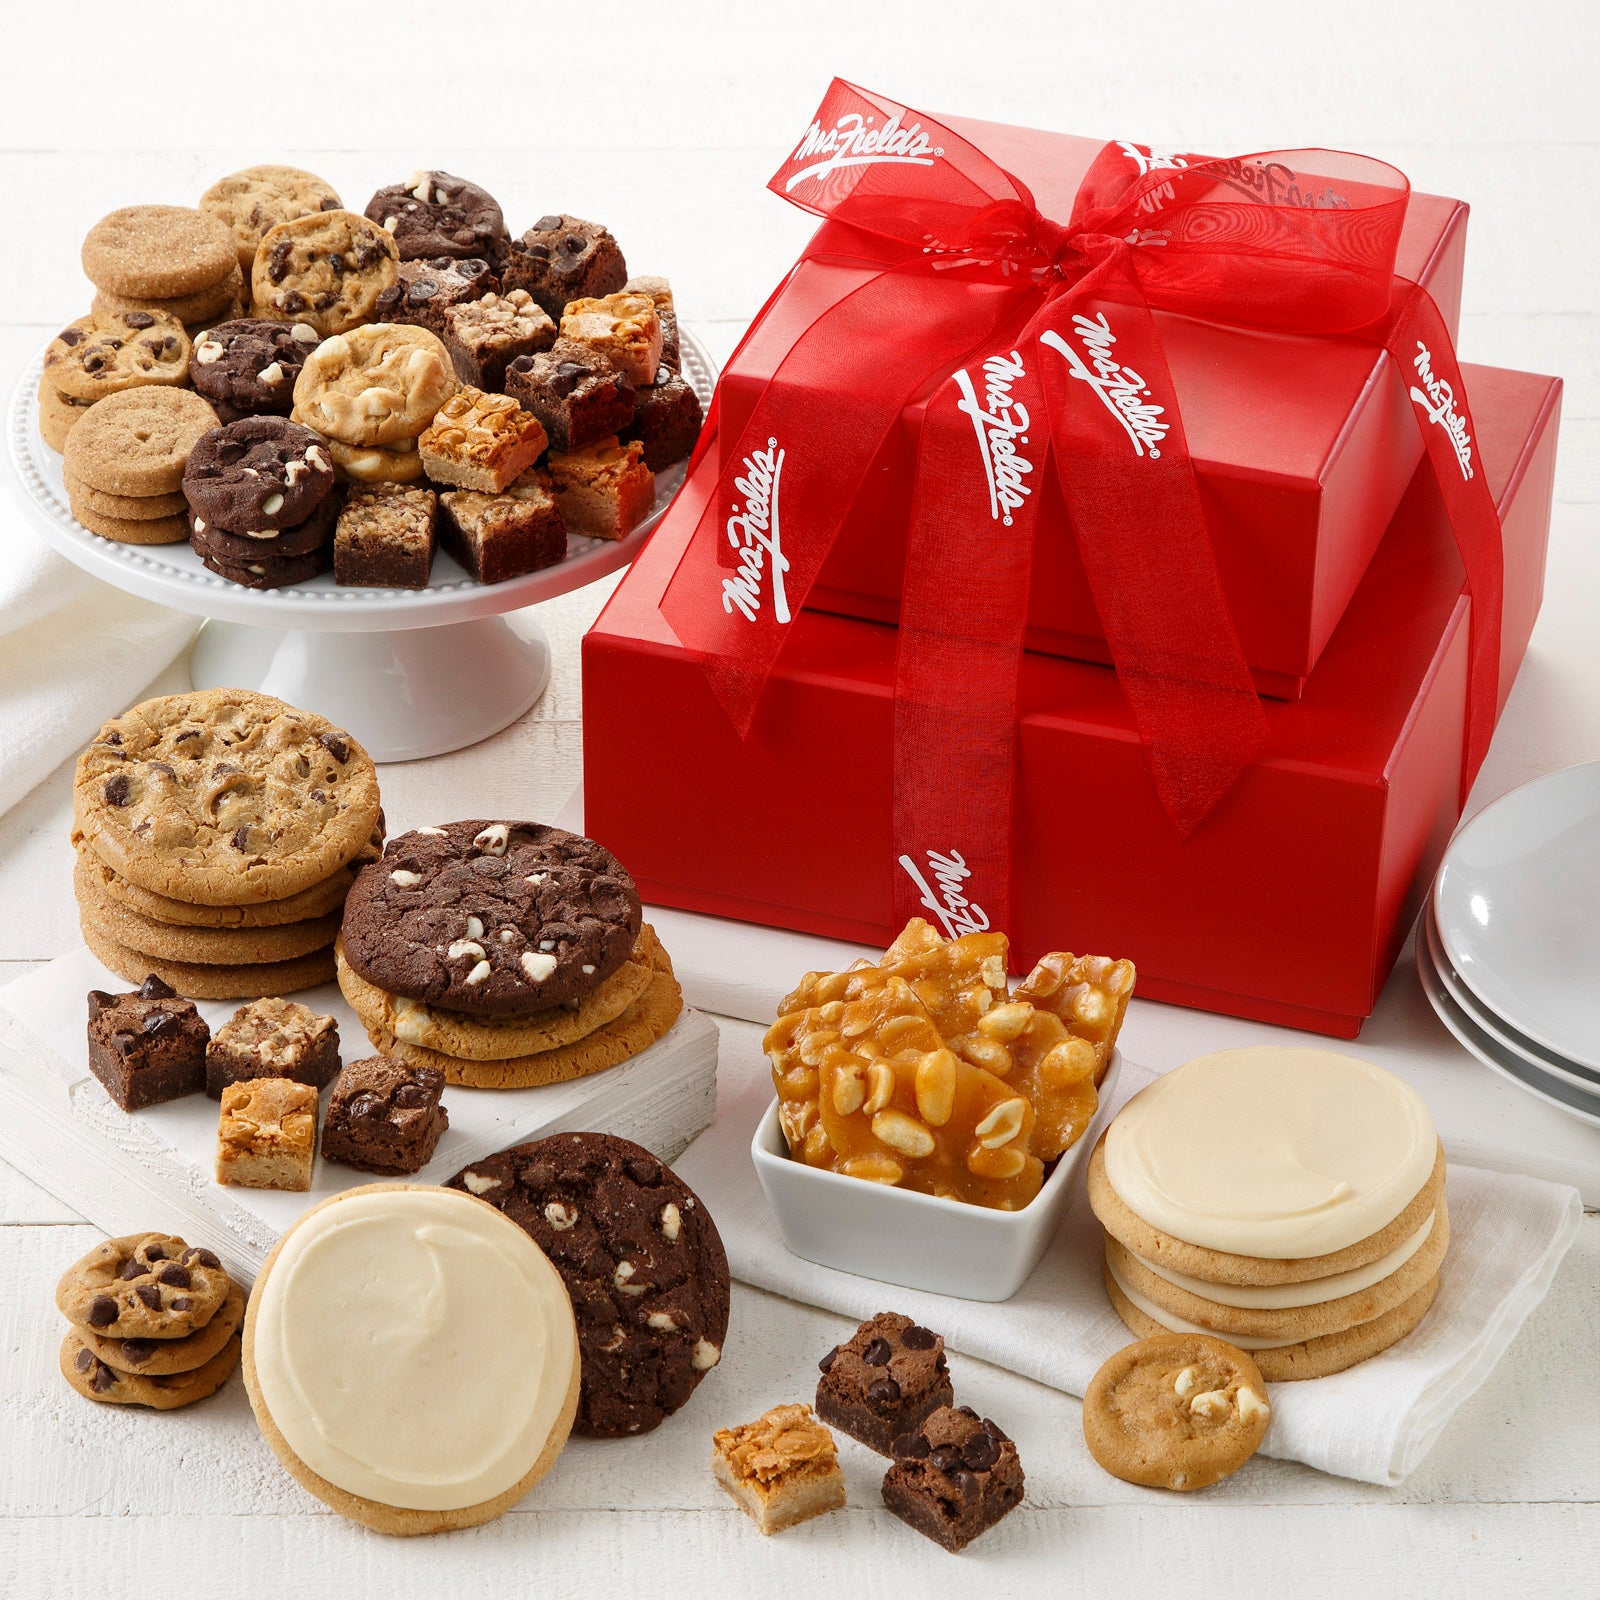 A two tier red box tower tied with a red Mrs. Fields ribbon and surrounded by an assortment of Nibblers®, original cookies, frosted cookies, brownie bites, and peanut brittle